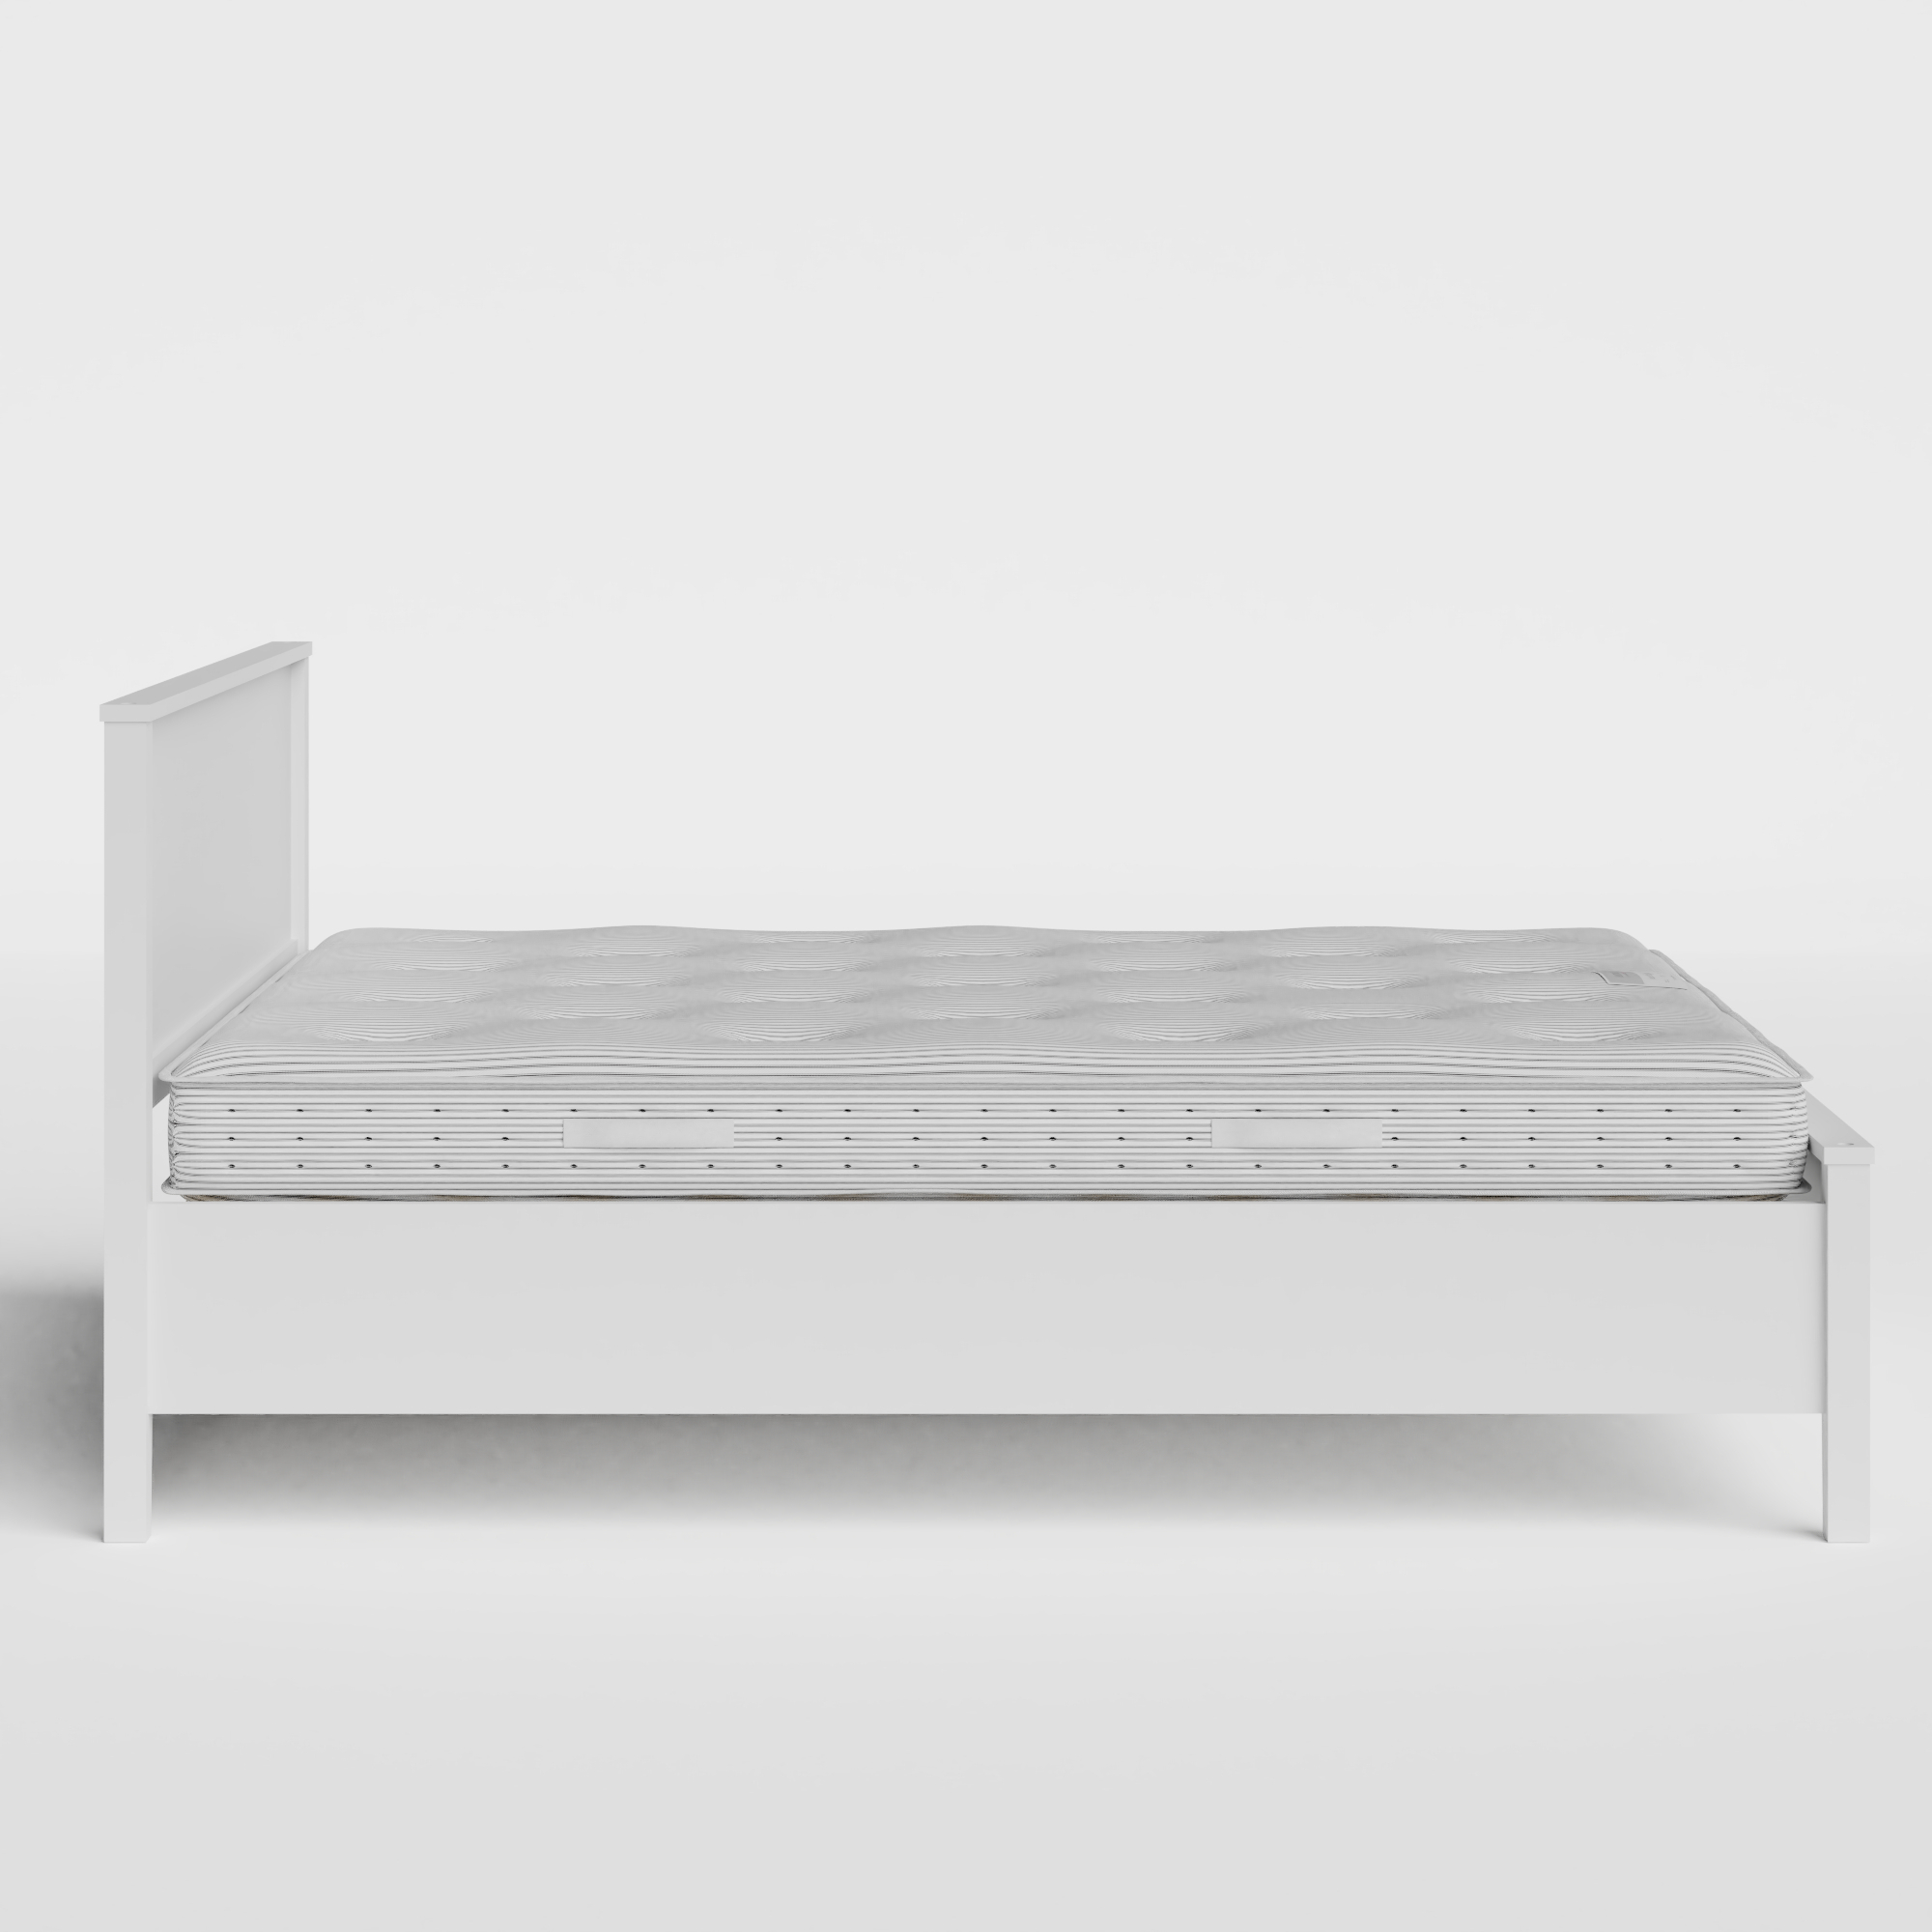 Ramsay Painted painted wood bed in white with Juno mattress